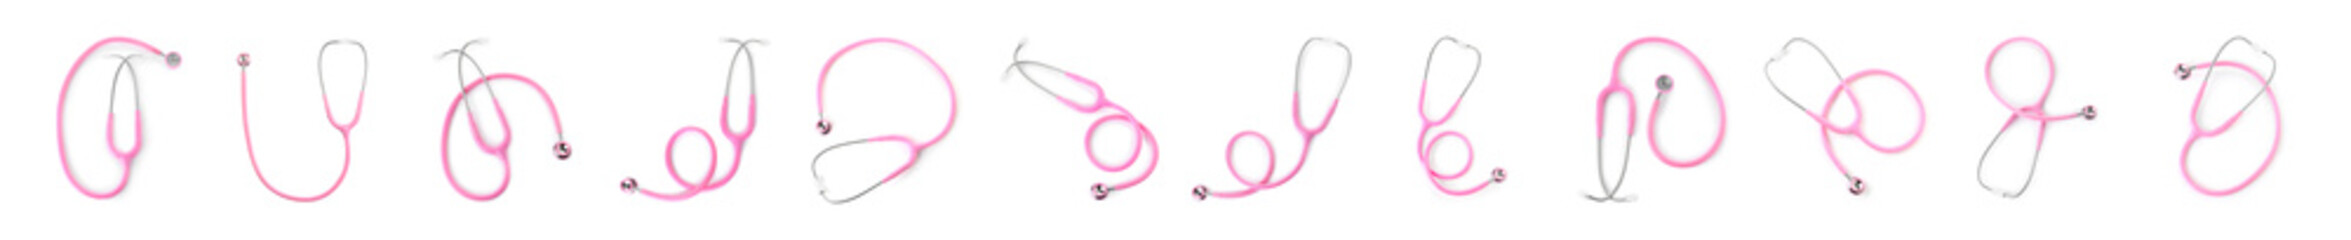 Set of pink stethoscopes on white background, top view. Medical device